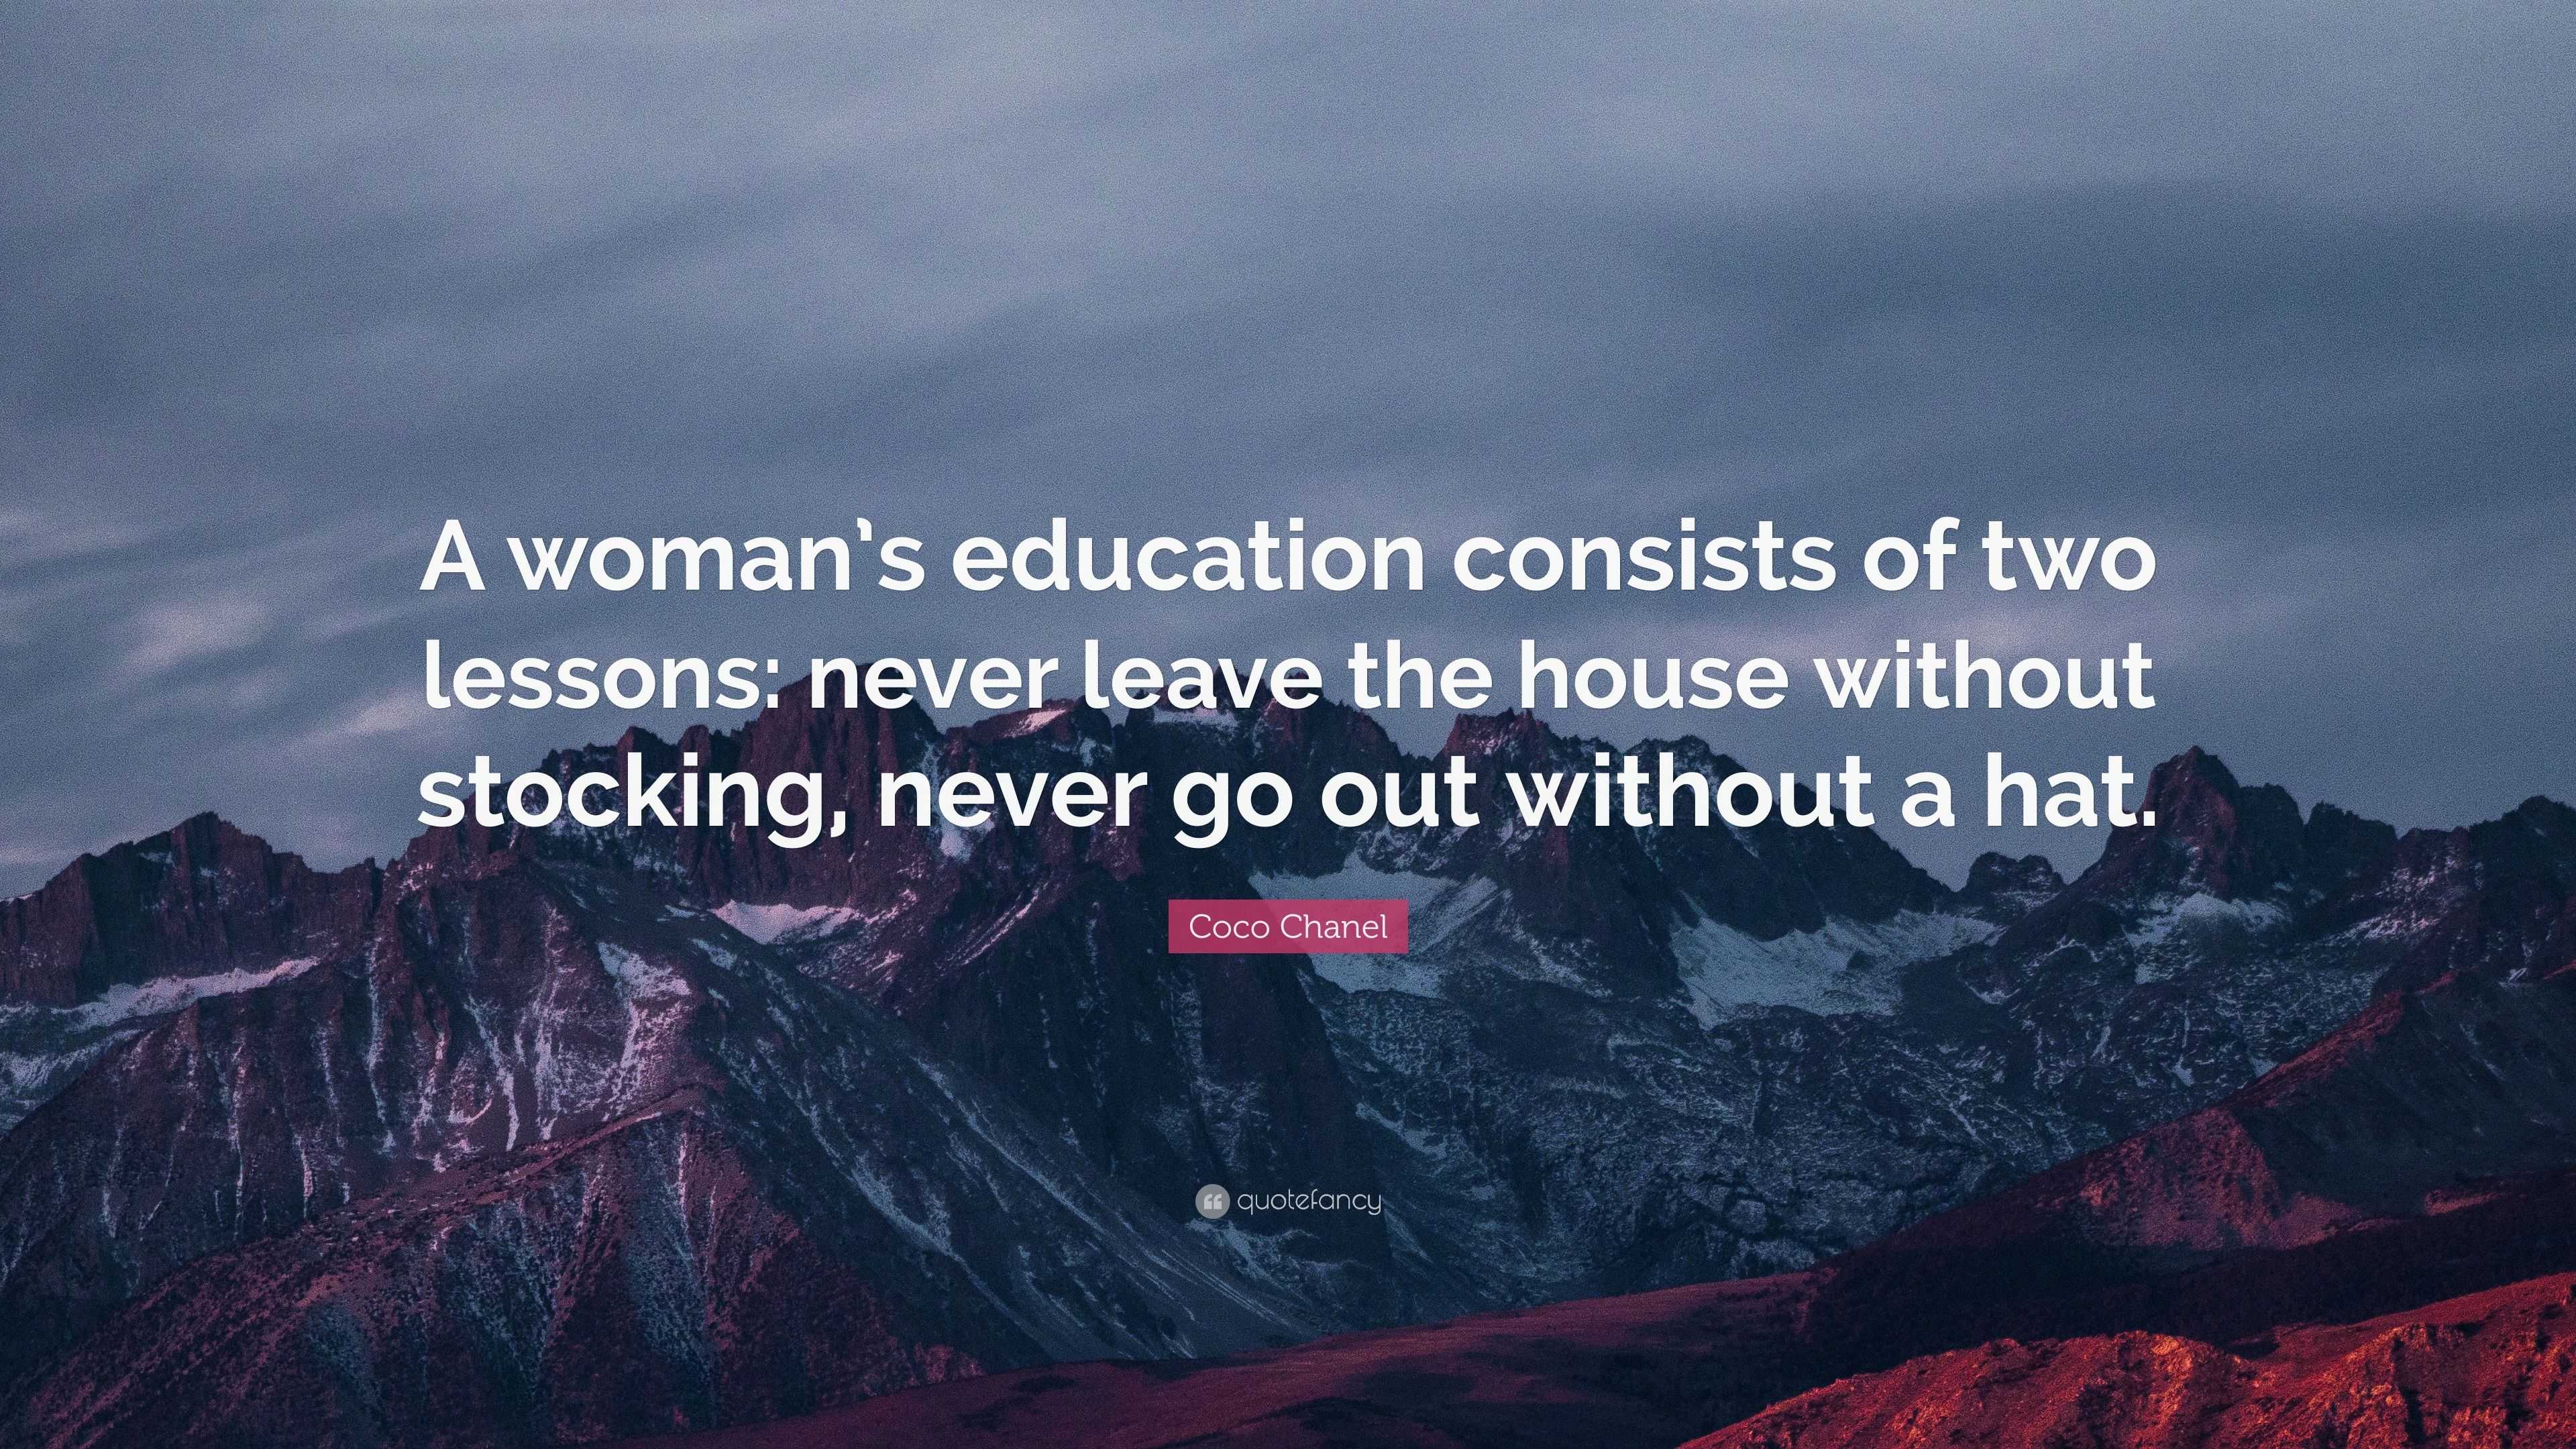 Coco Chanel Quote: “A woman's education consists of two lessons